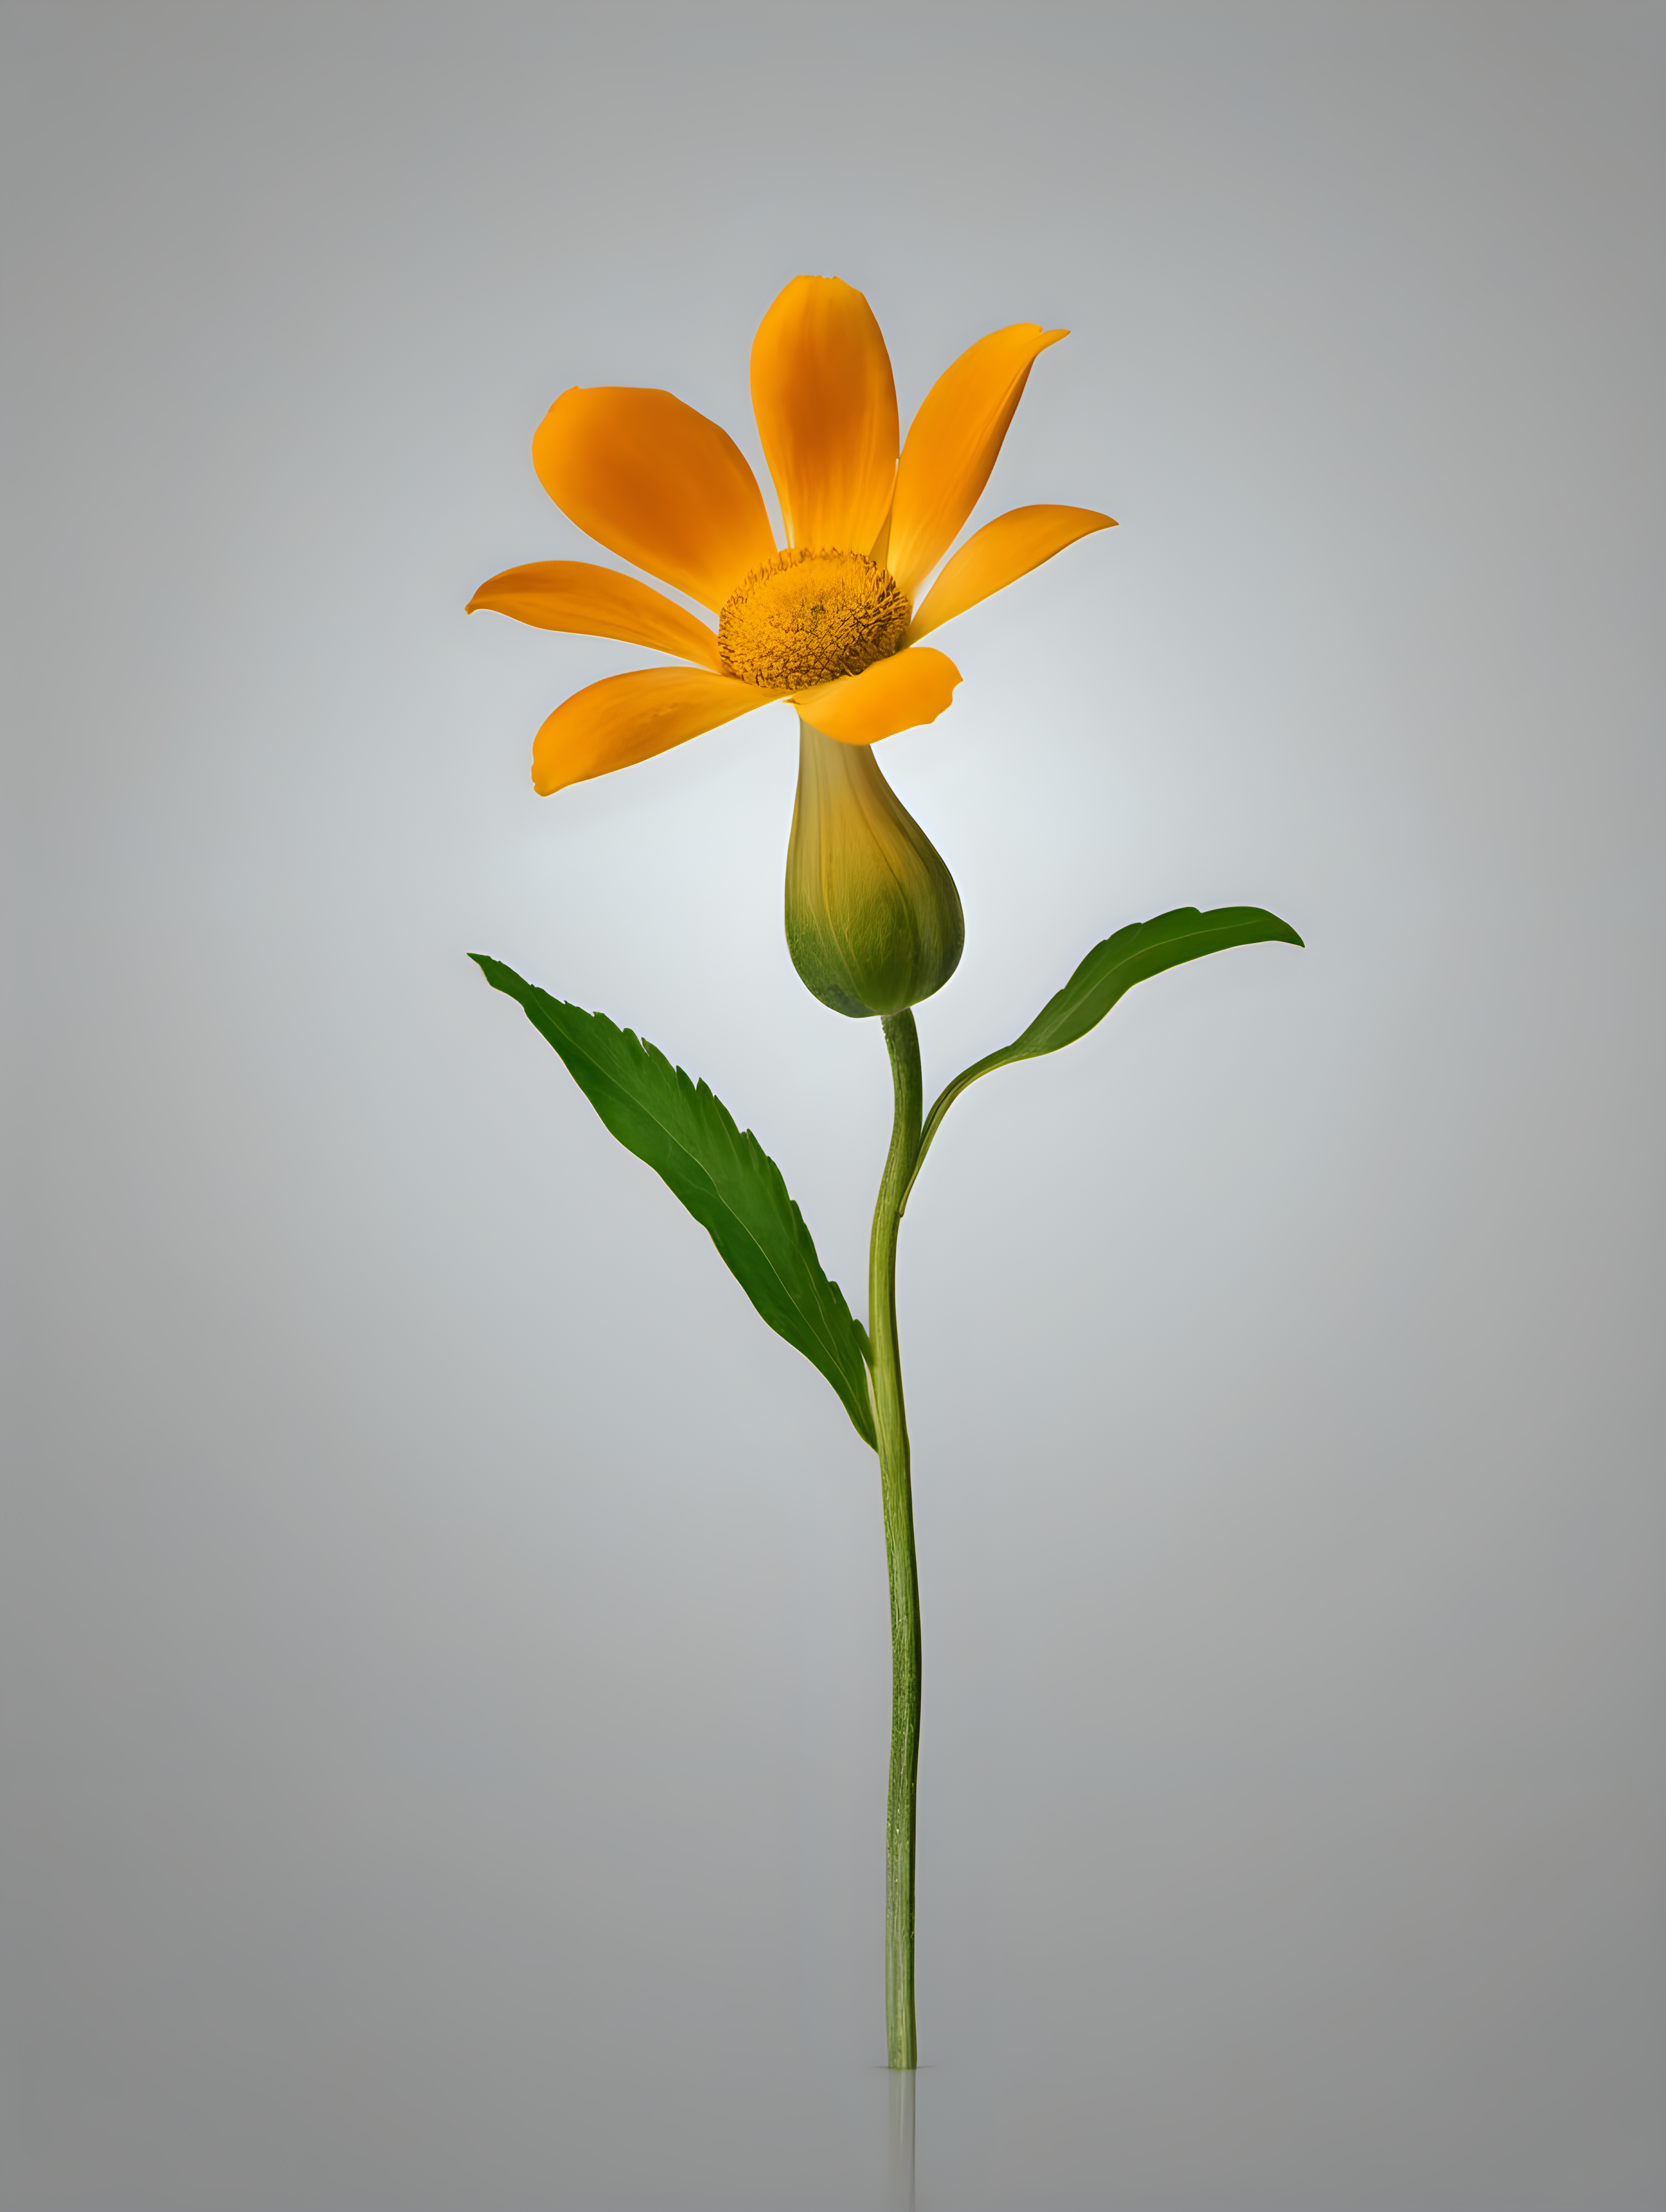 a solitary flower without any background